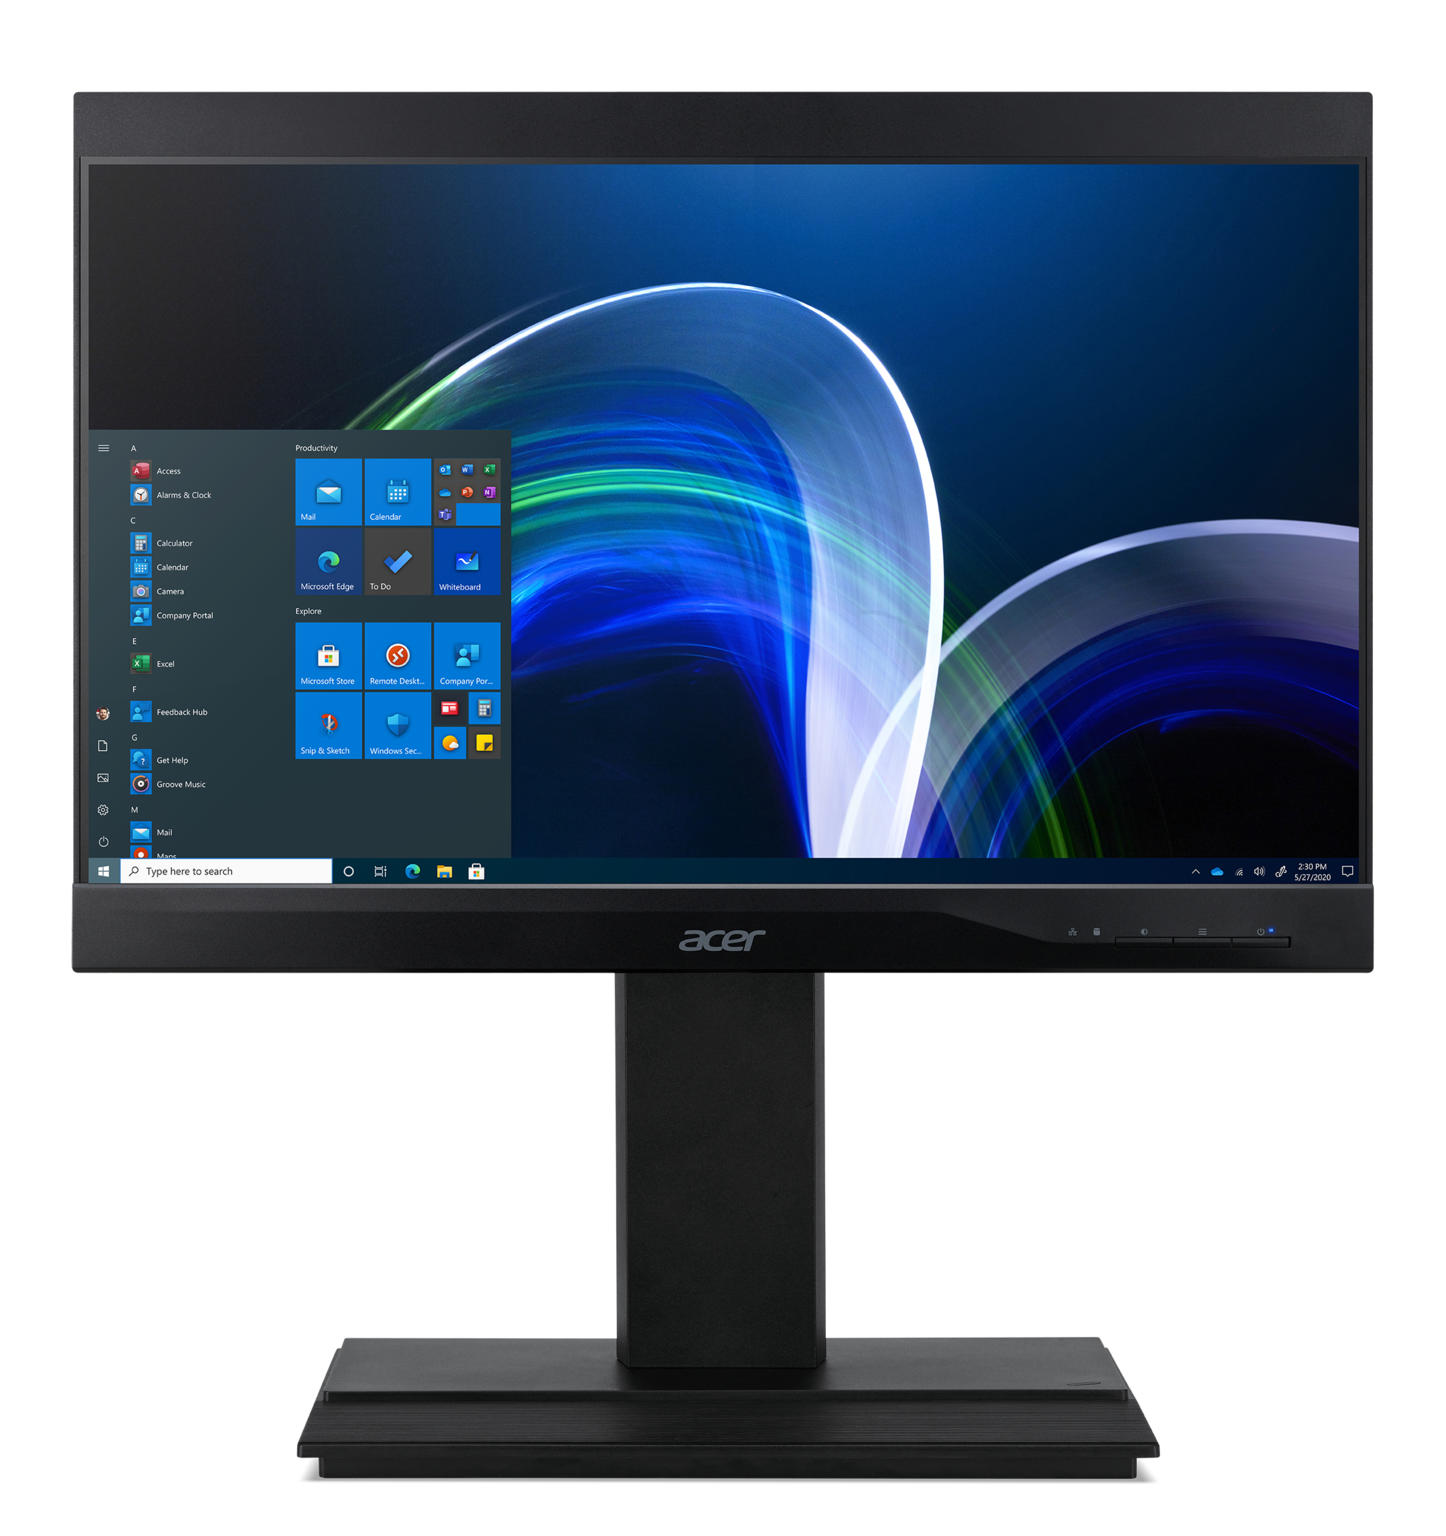 Aanbieding All-In-One PC's. Acer Veriton Z4880G I7460 Pro AiO PC